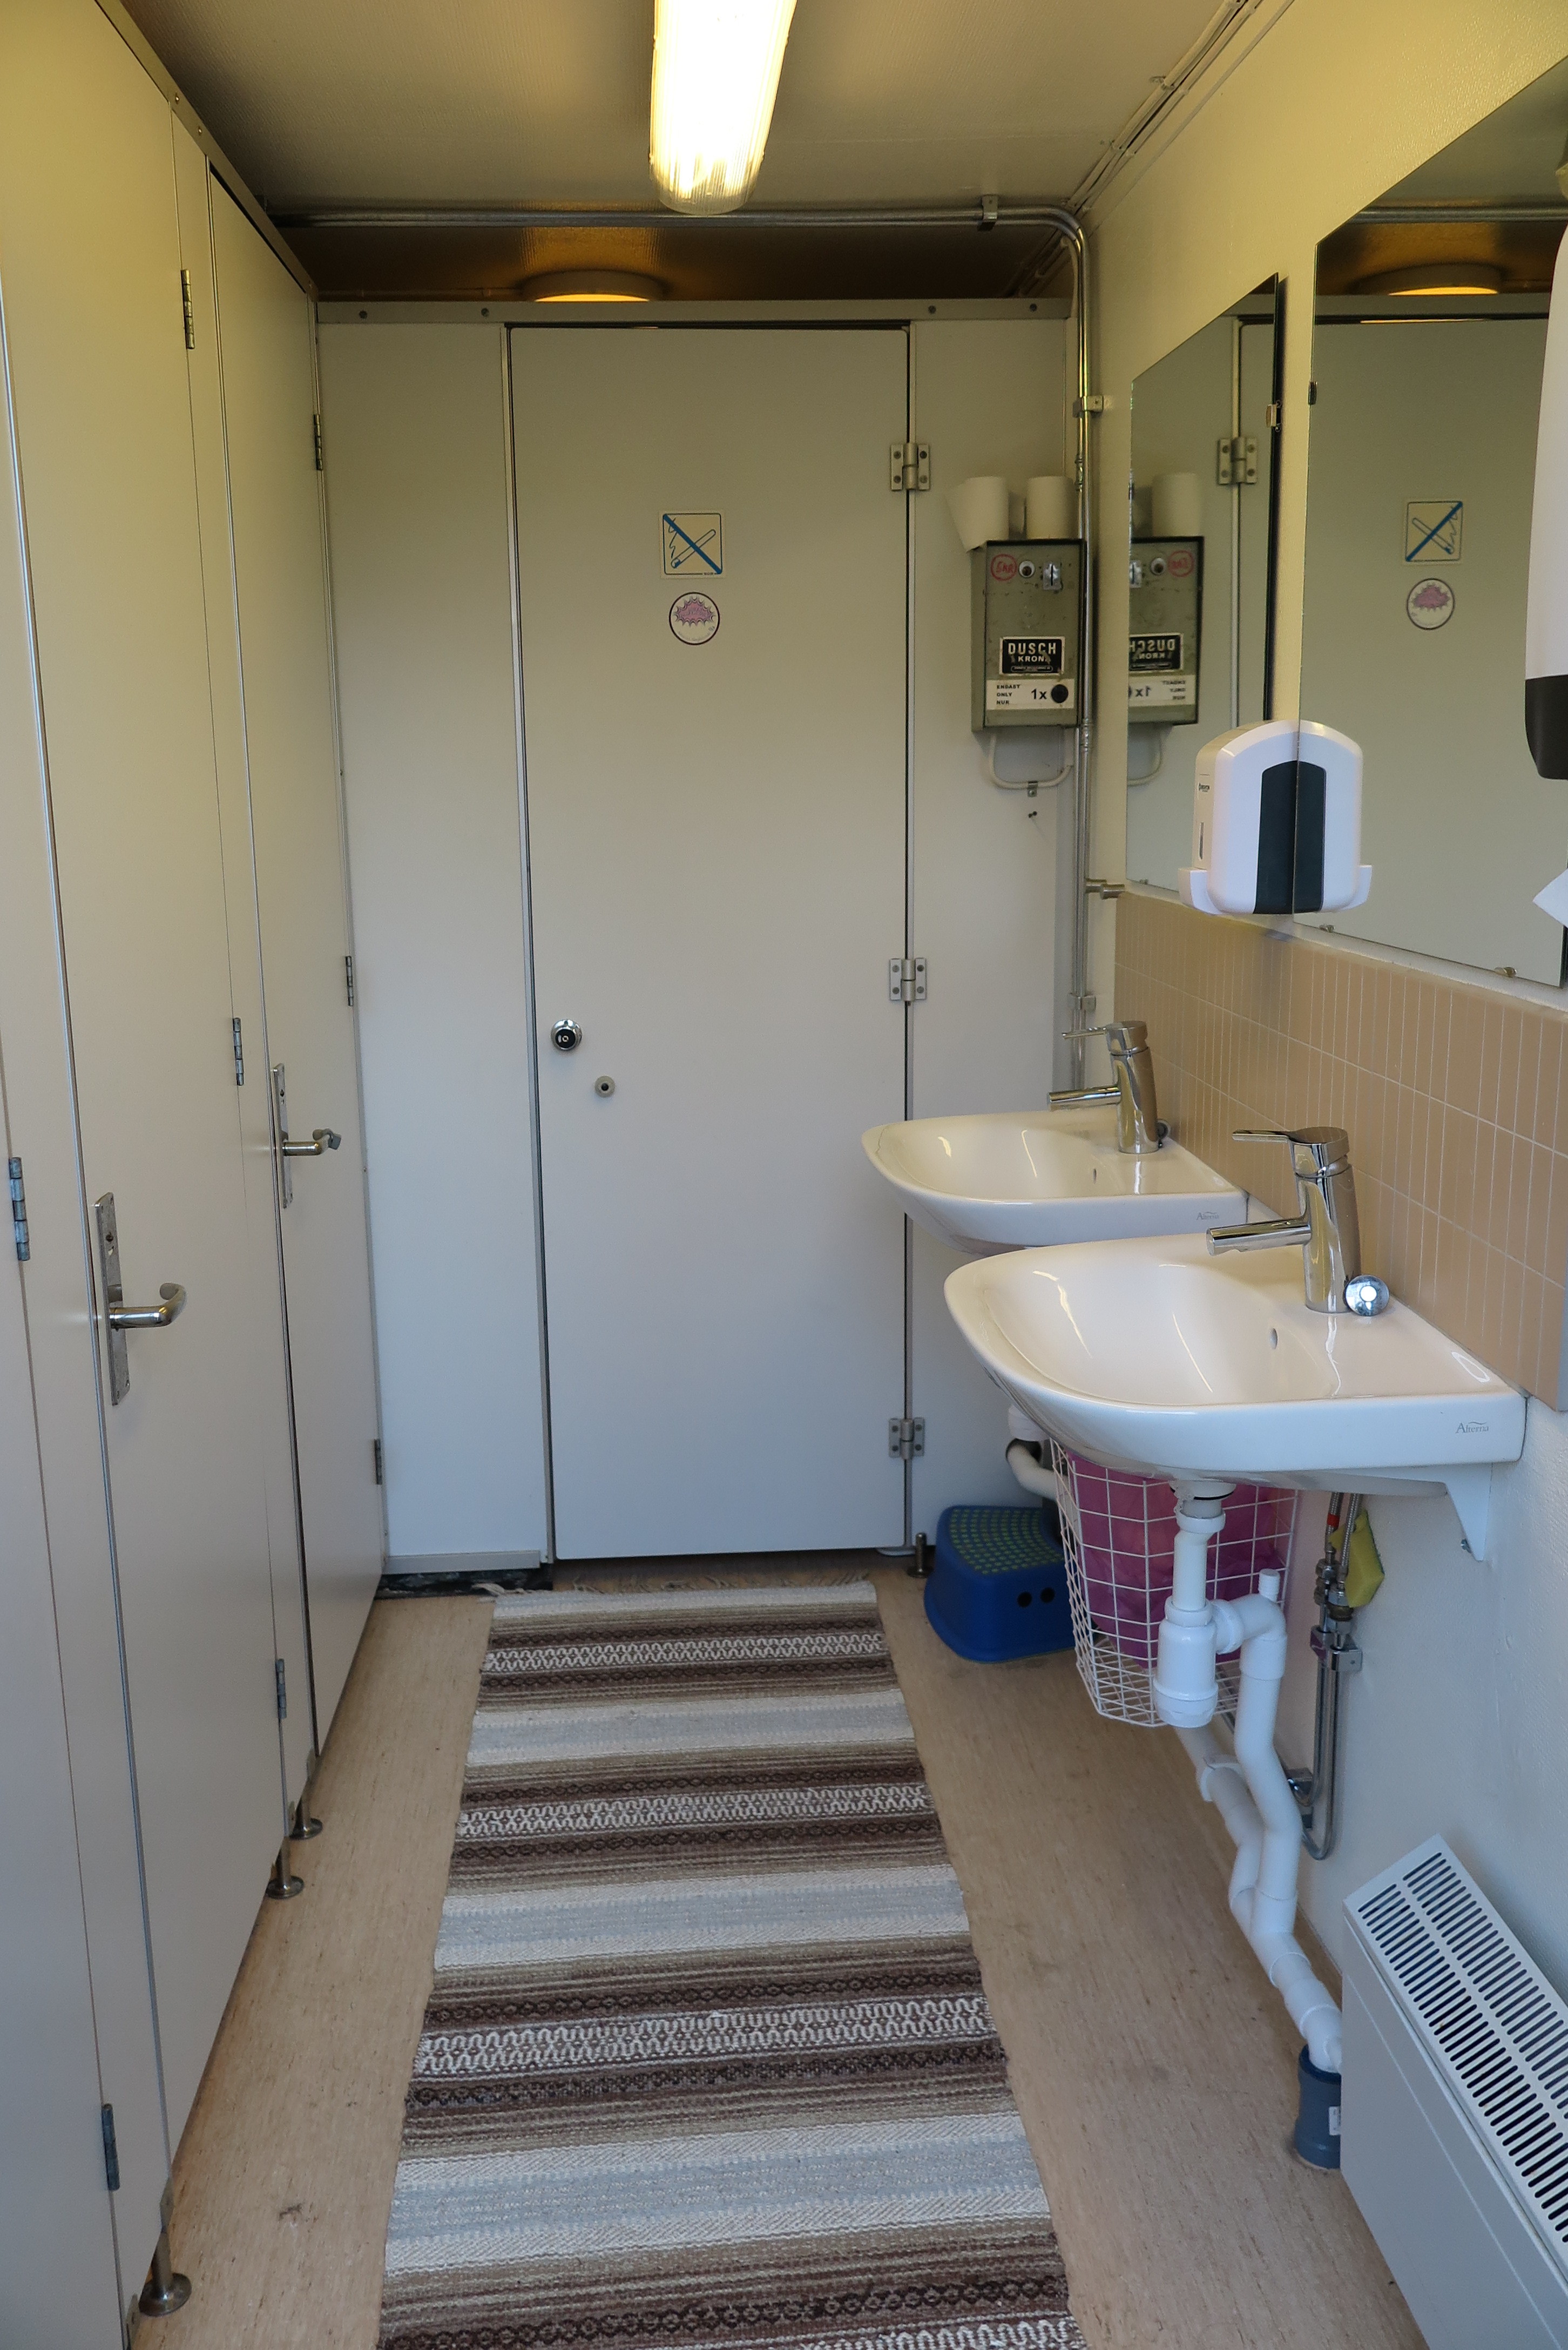 The ladies room with shower and laundry